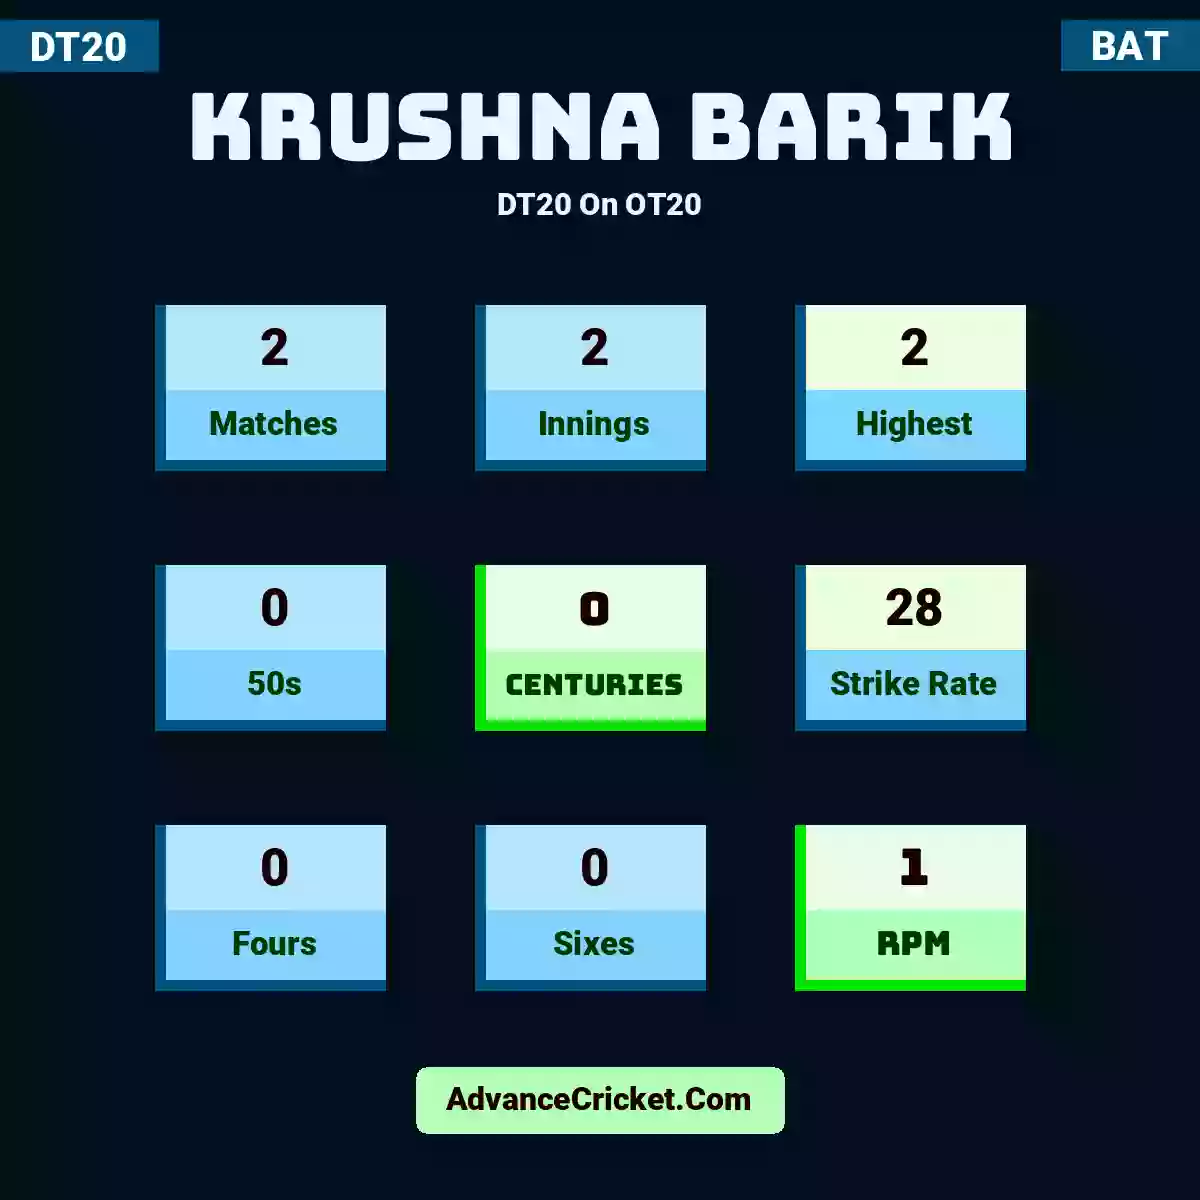 Krushna Barik DT20  On OT20, Krushna Barik played 2 matches, scored 2 runs as highest, 0 half-centuries, and 0 centuries, with a strike rate of 28. K.Barik hit 0 fours and 0 sixes, with an RPM of 1.